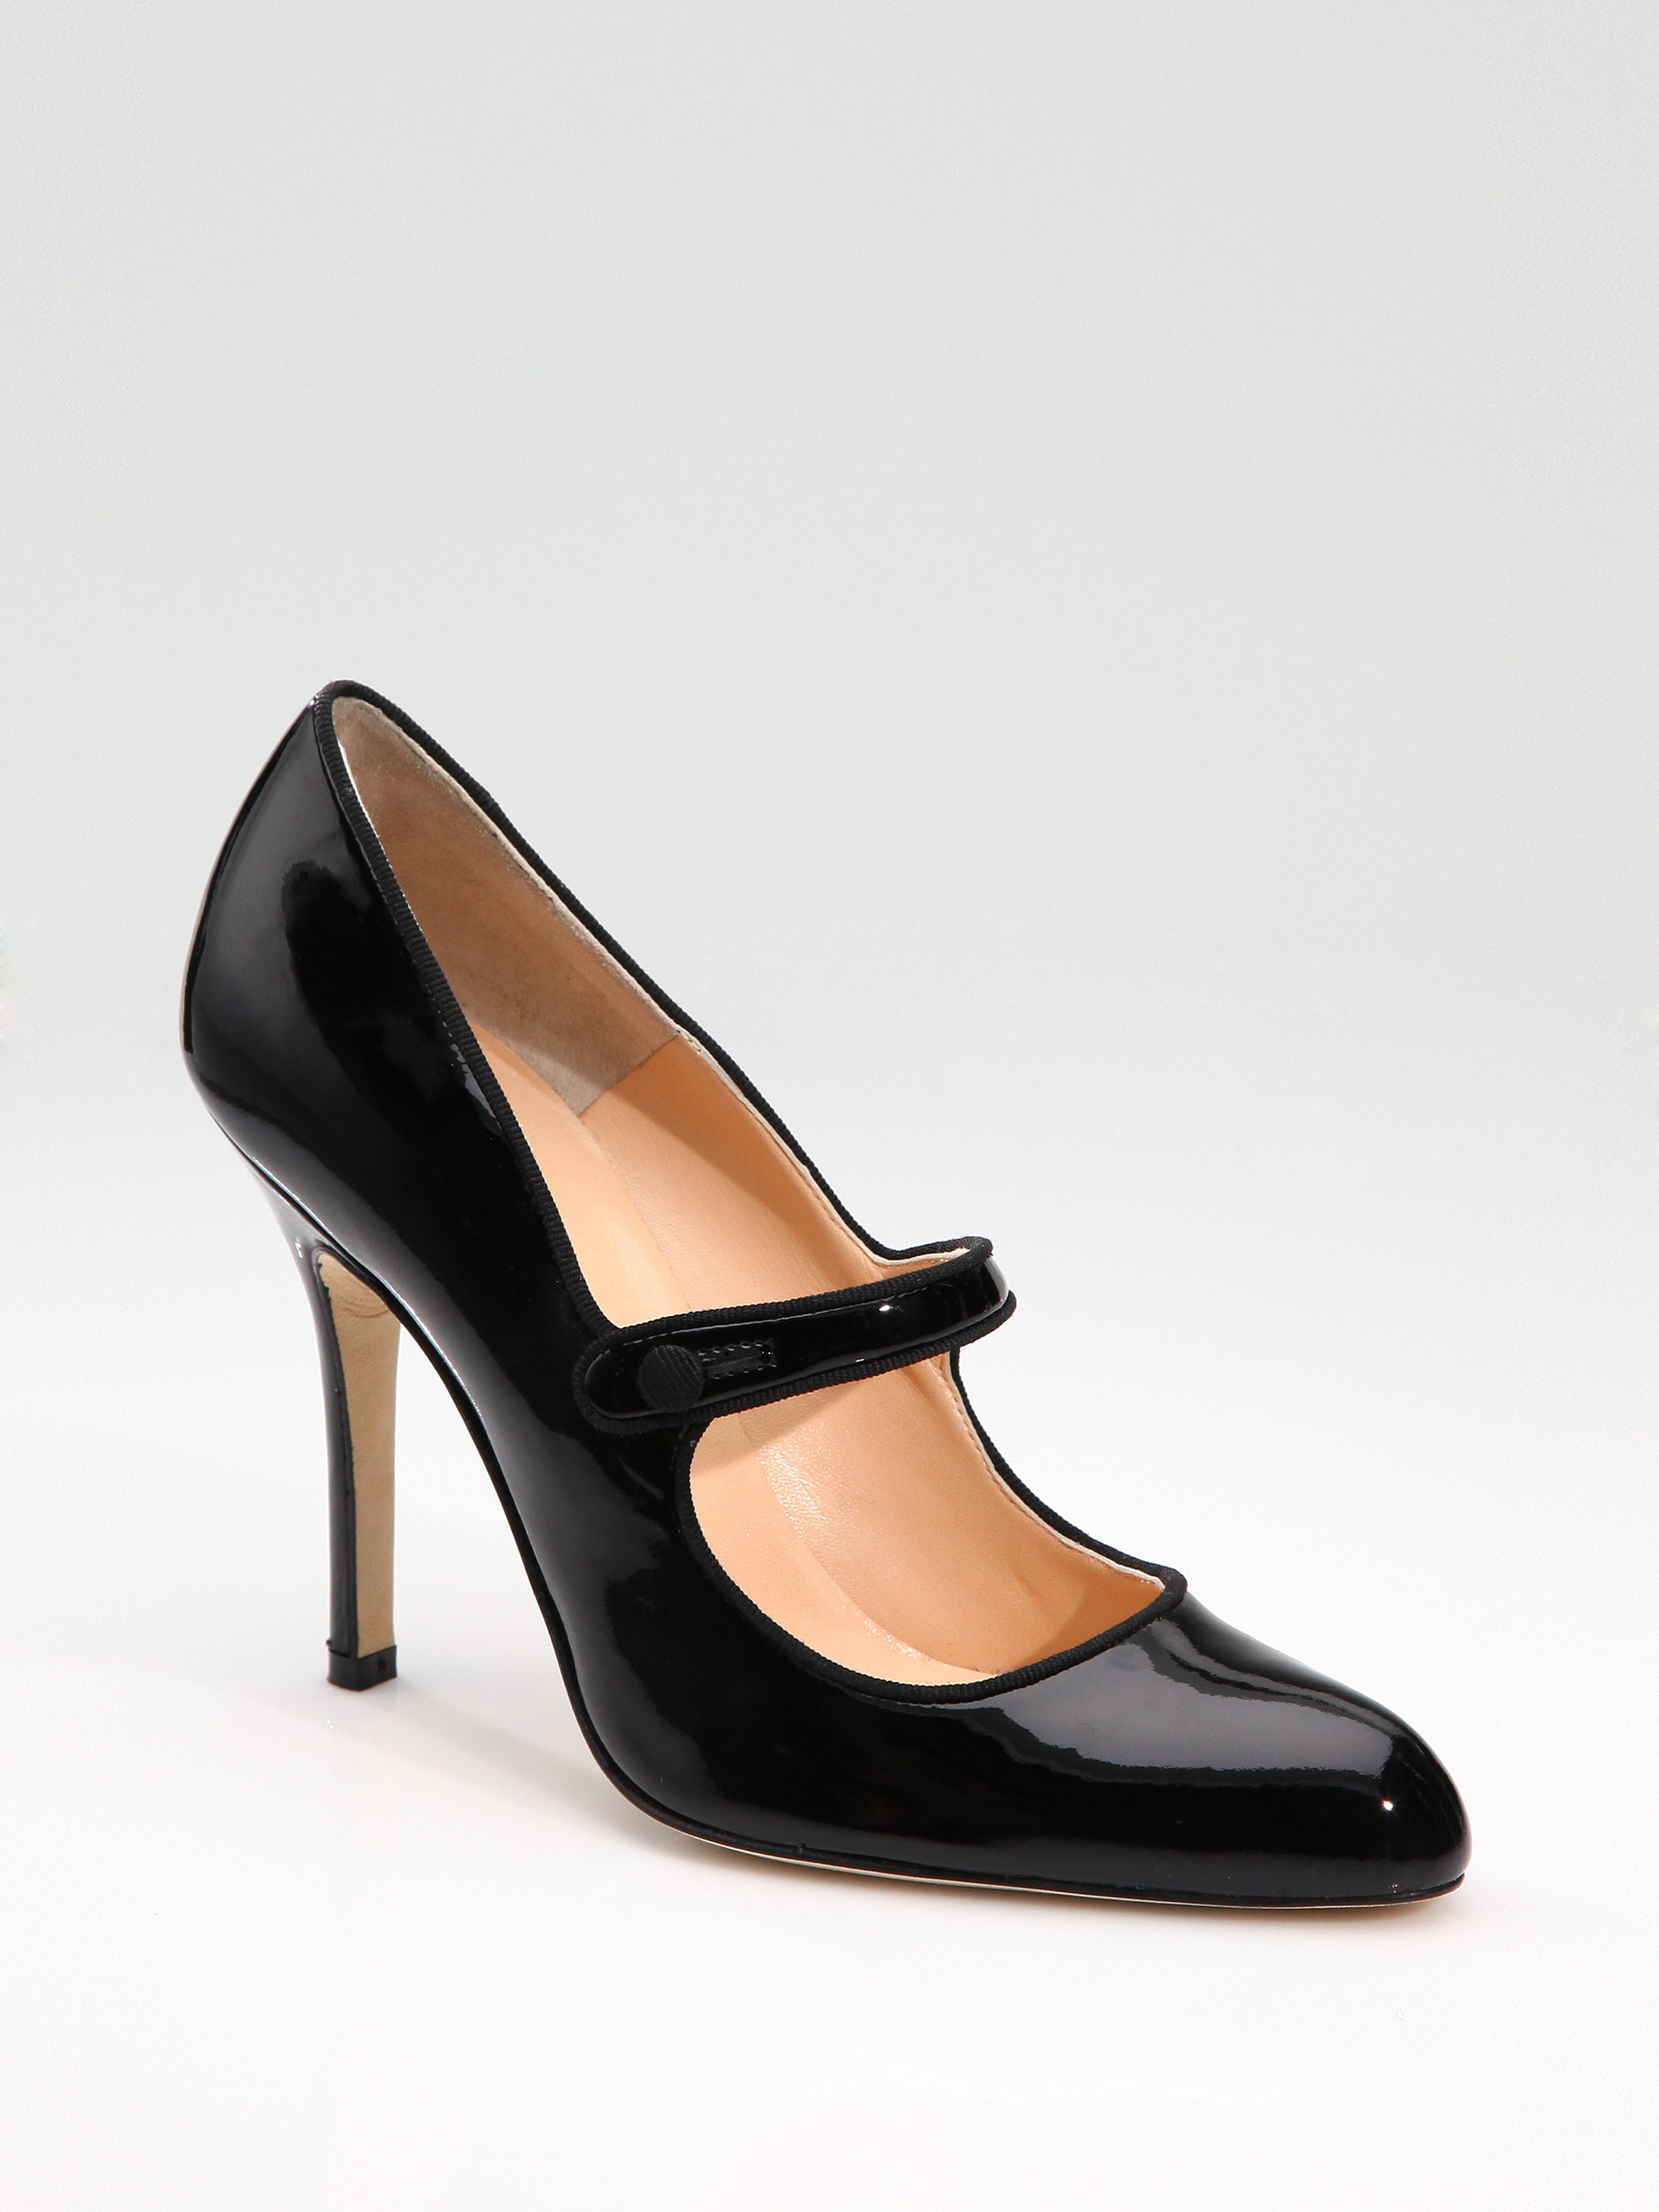 Manolo Blahnik Campy Patent Leather Mary Jane Pumps in Black | Lyst